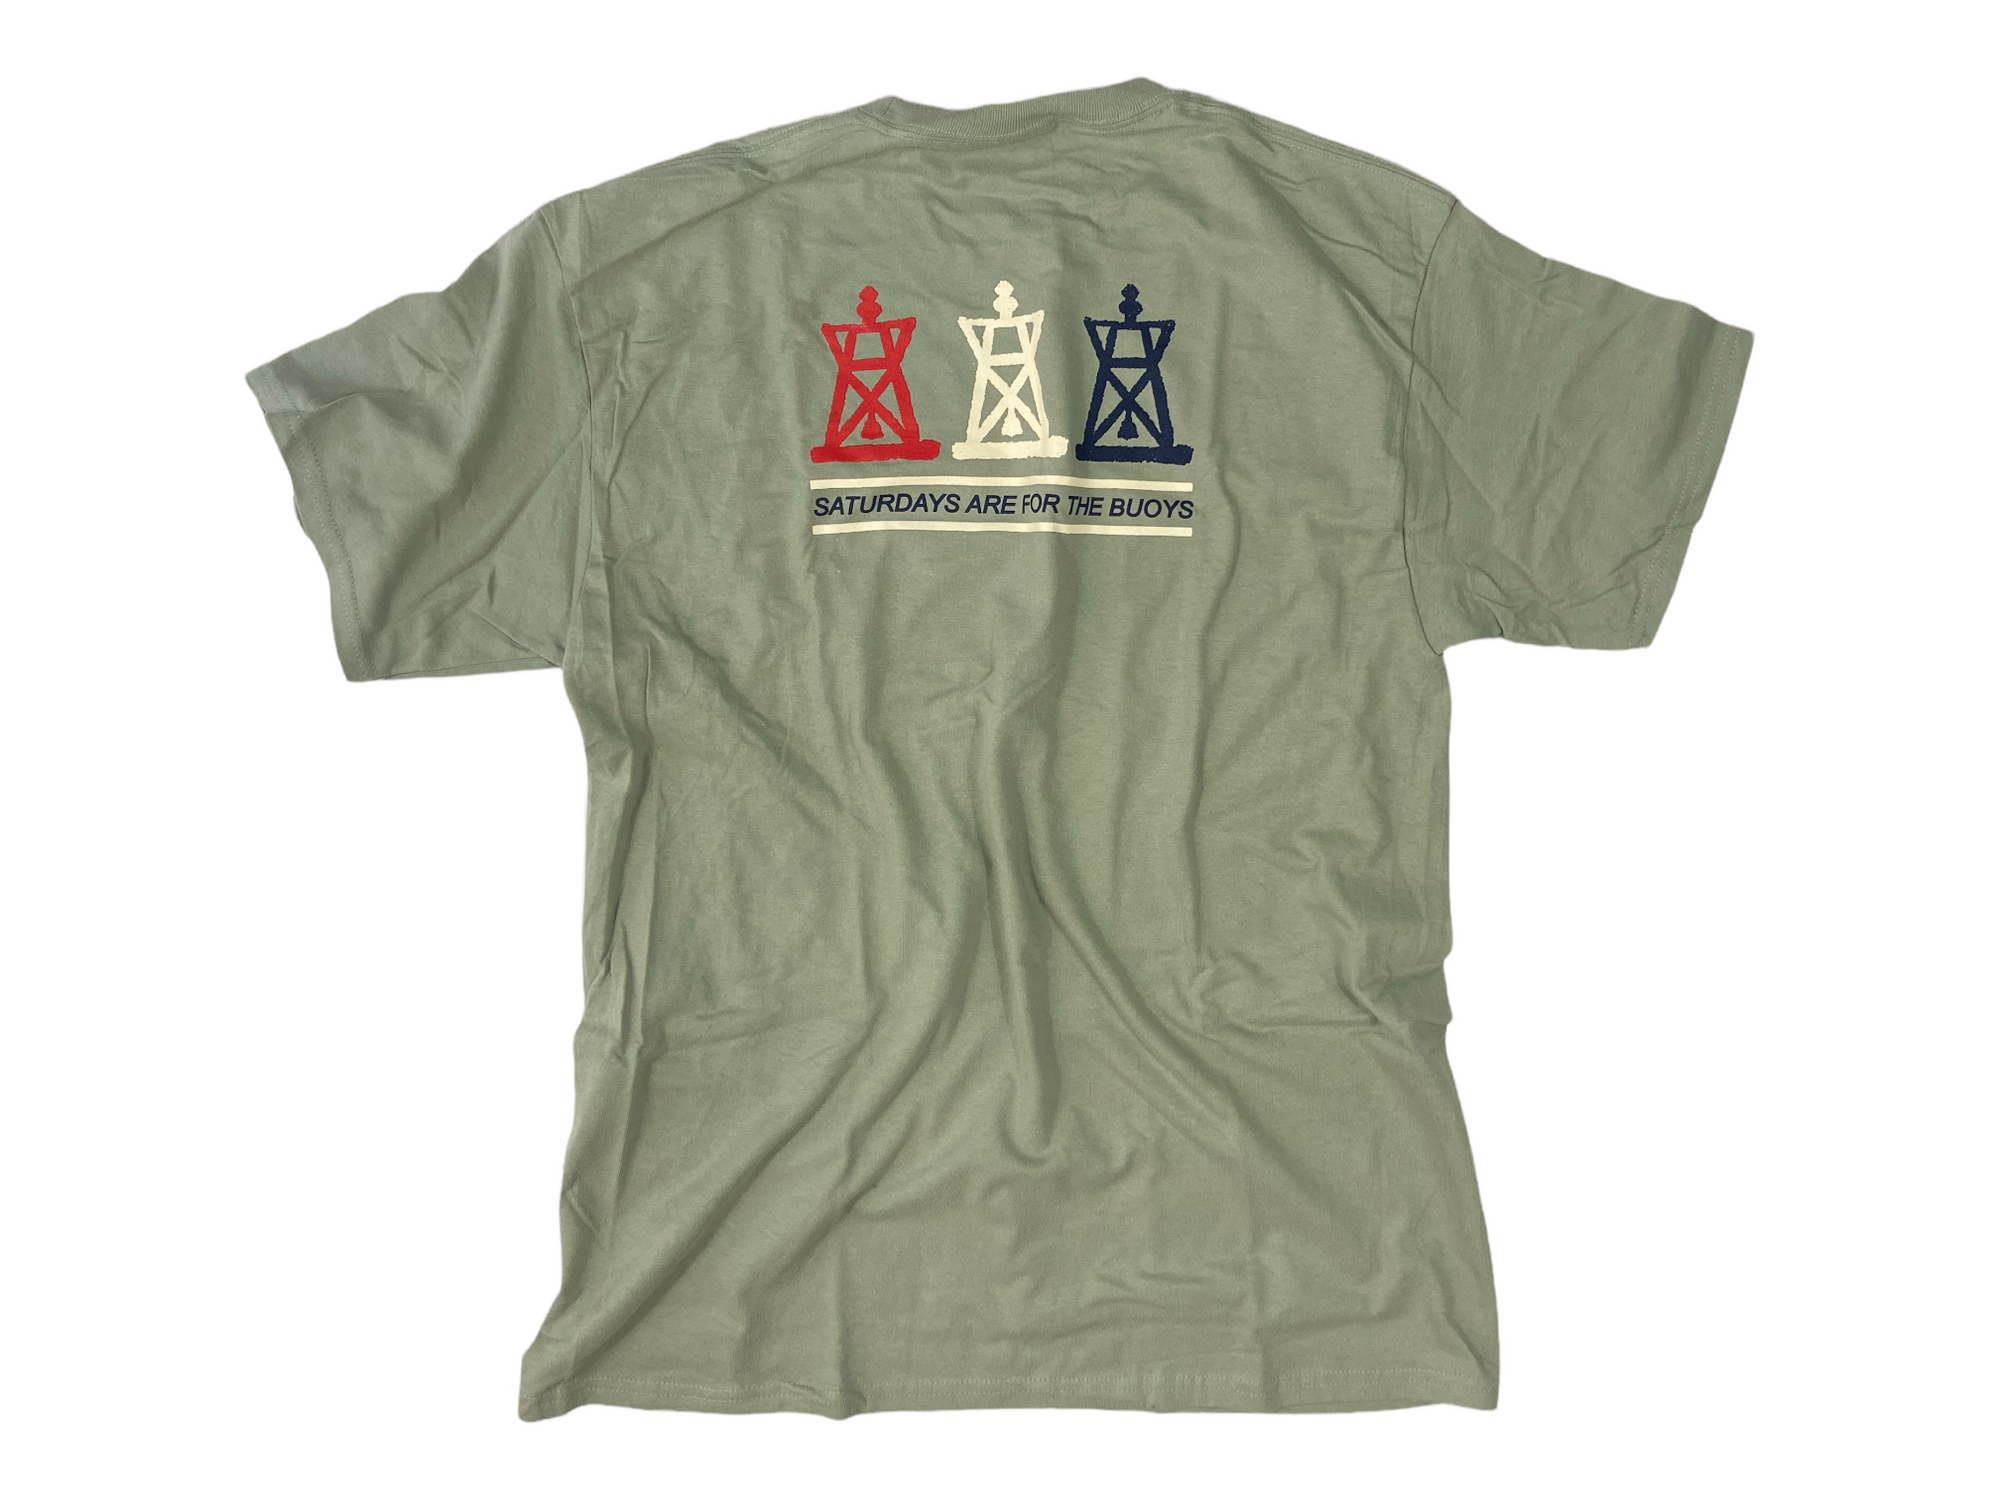 Saturdays Are For The BUOYS - Original Marblehead Green  SS T